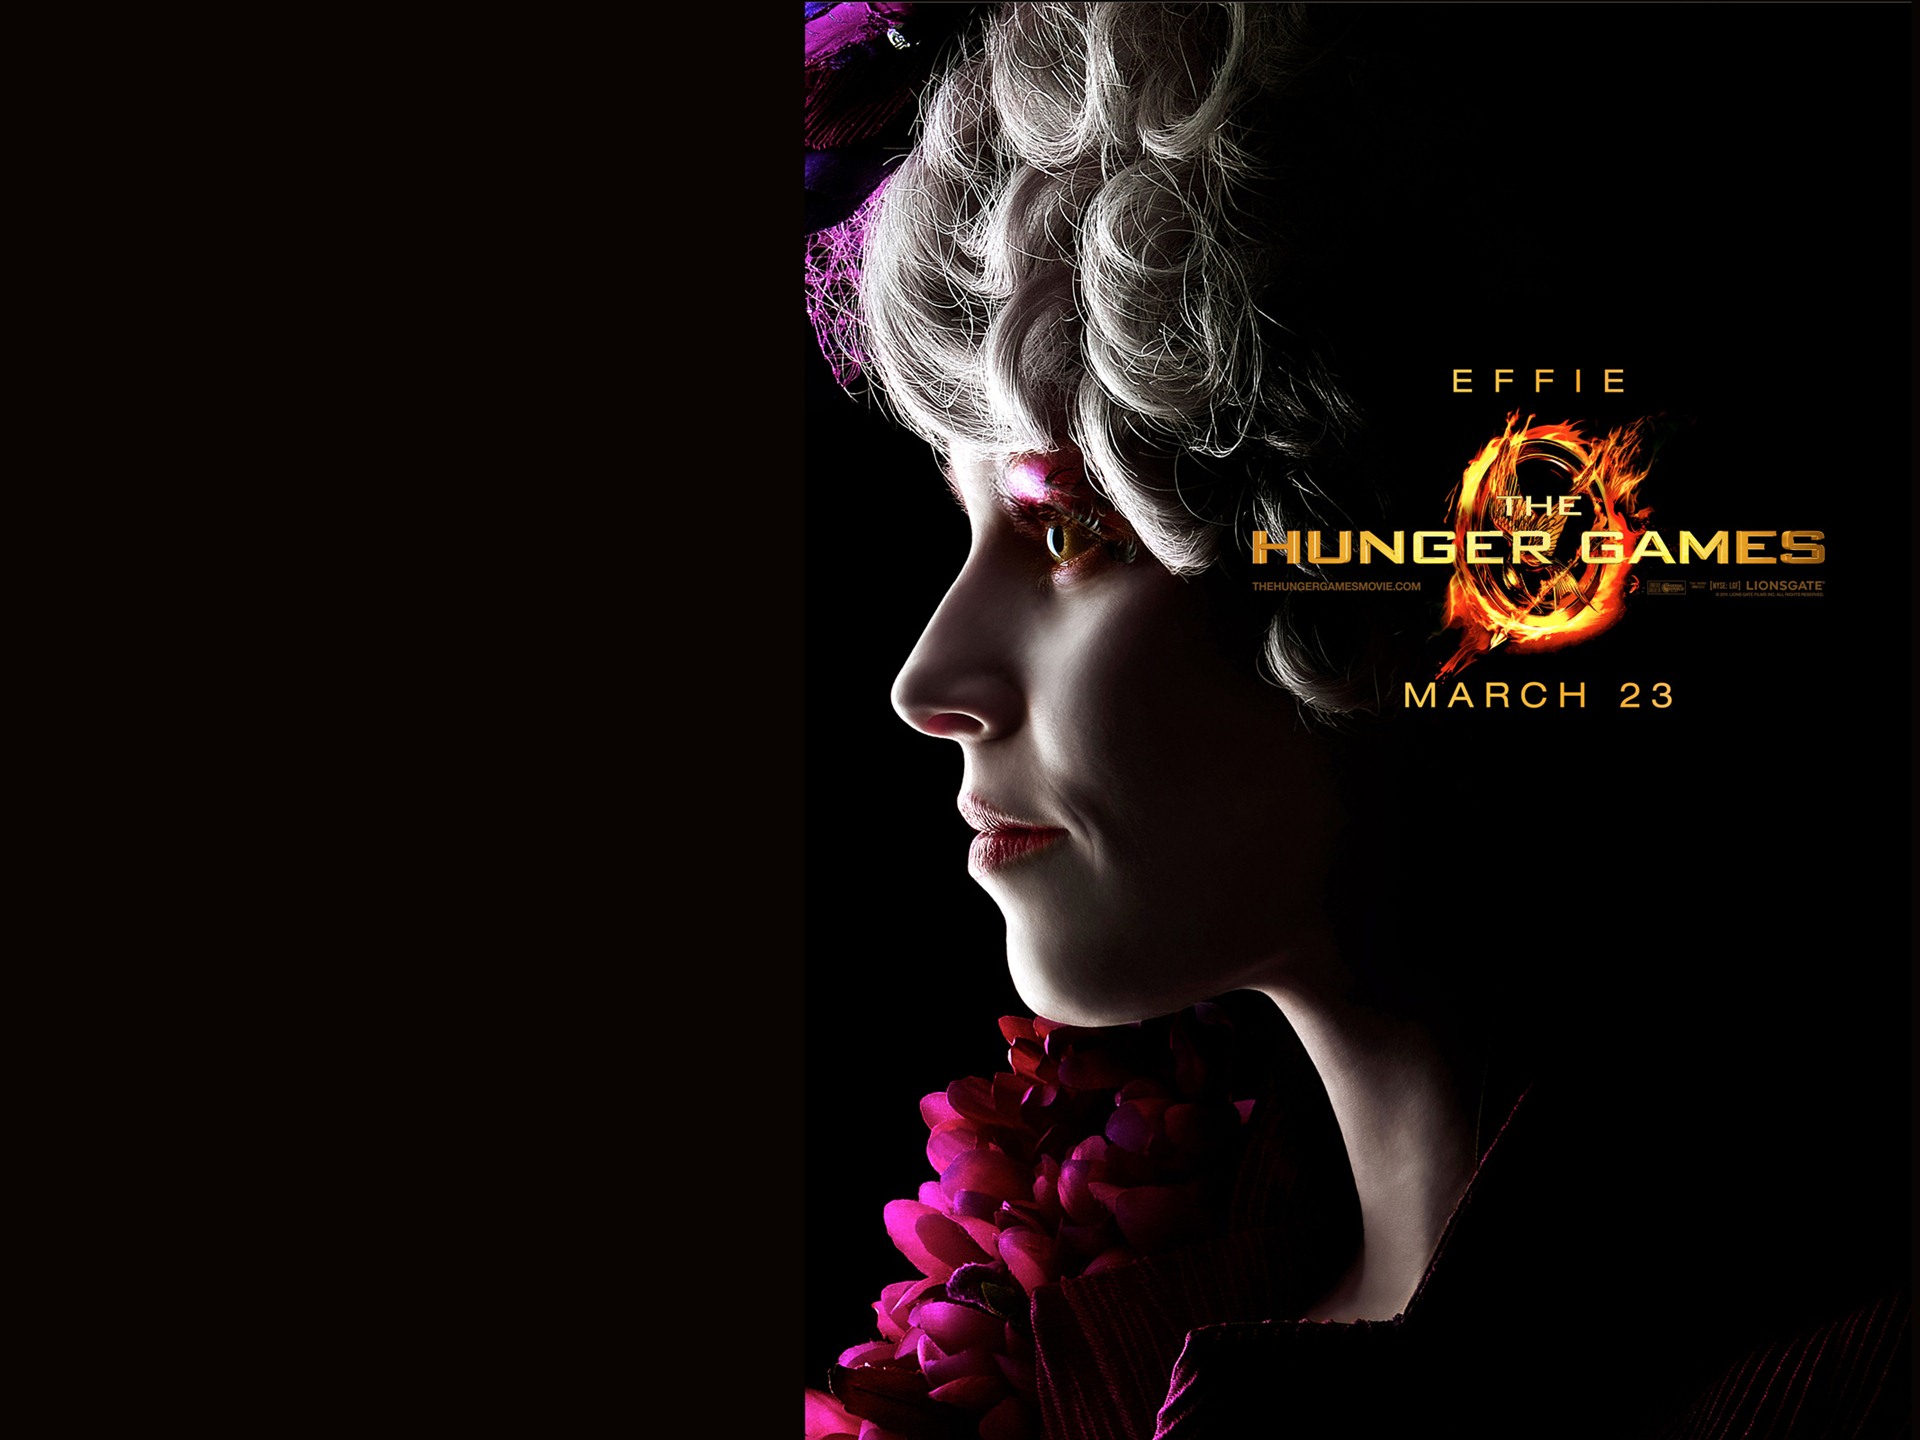 The Hunger Games HD wallpapers #10 - 1920x1440